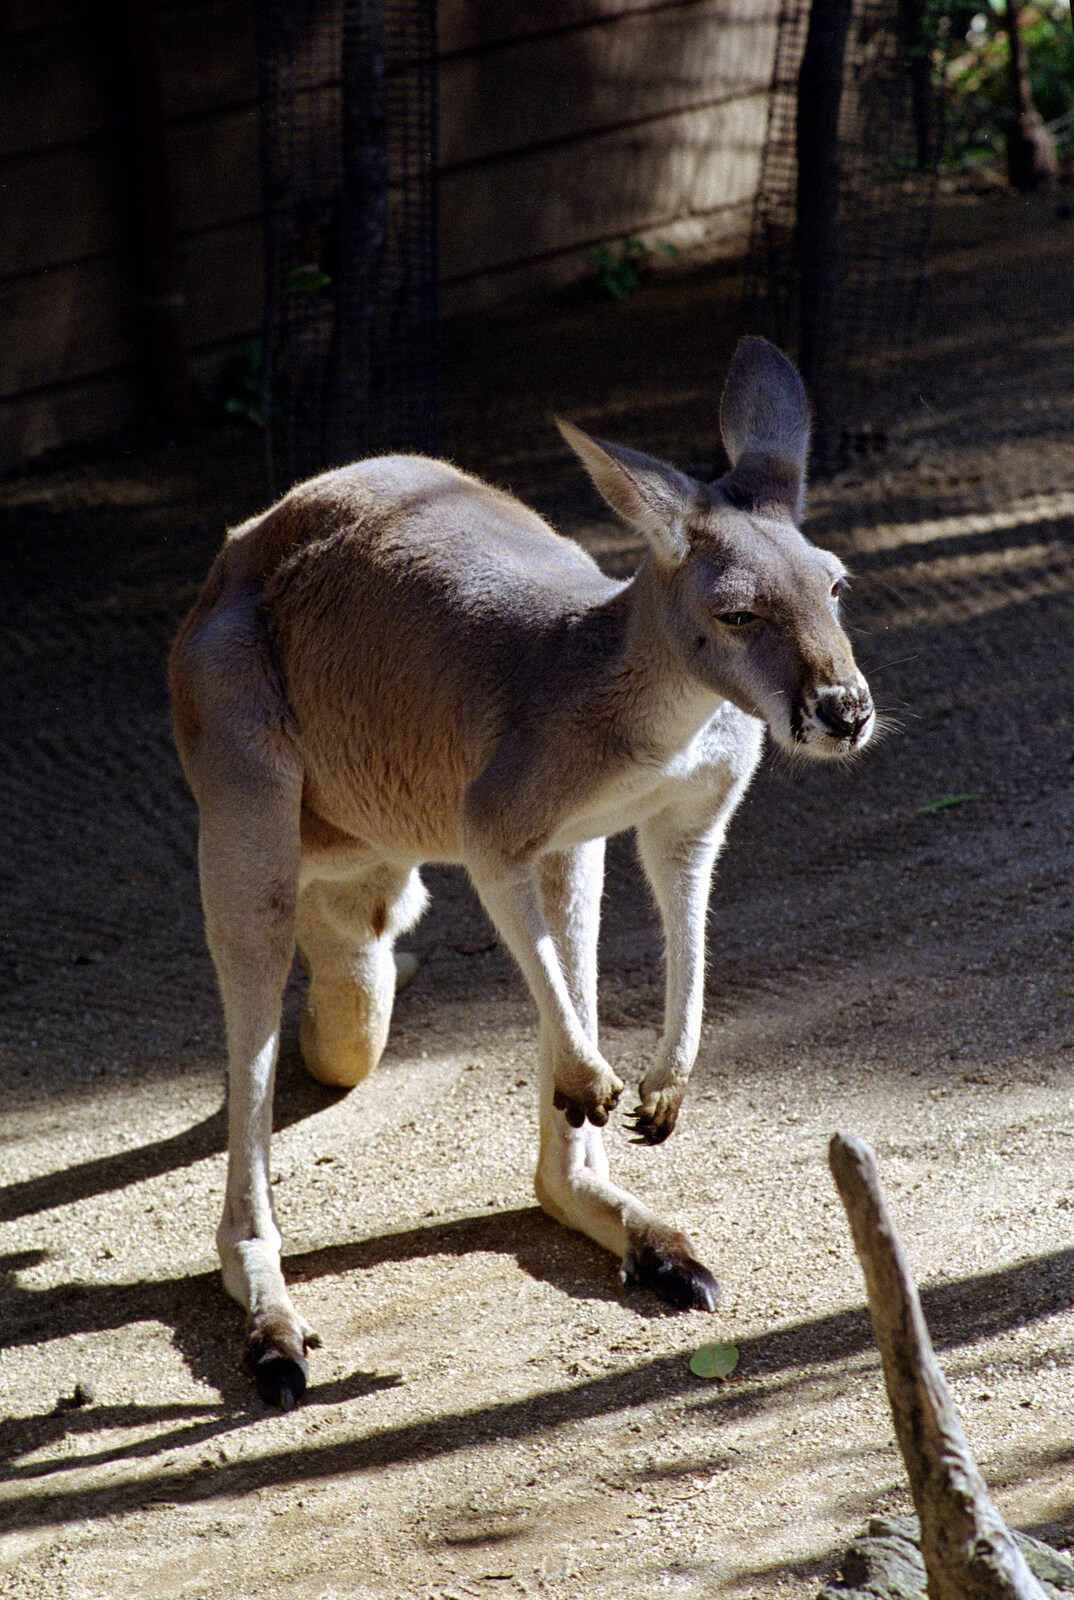 A kangaroo sits around from A Trip to the Zoo, Sydney, Australia - 7th April 2000